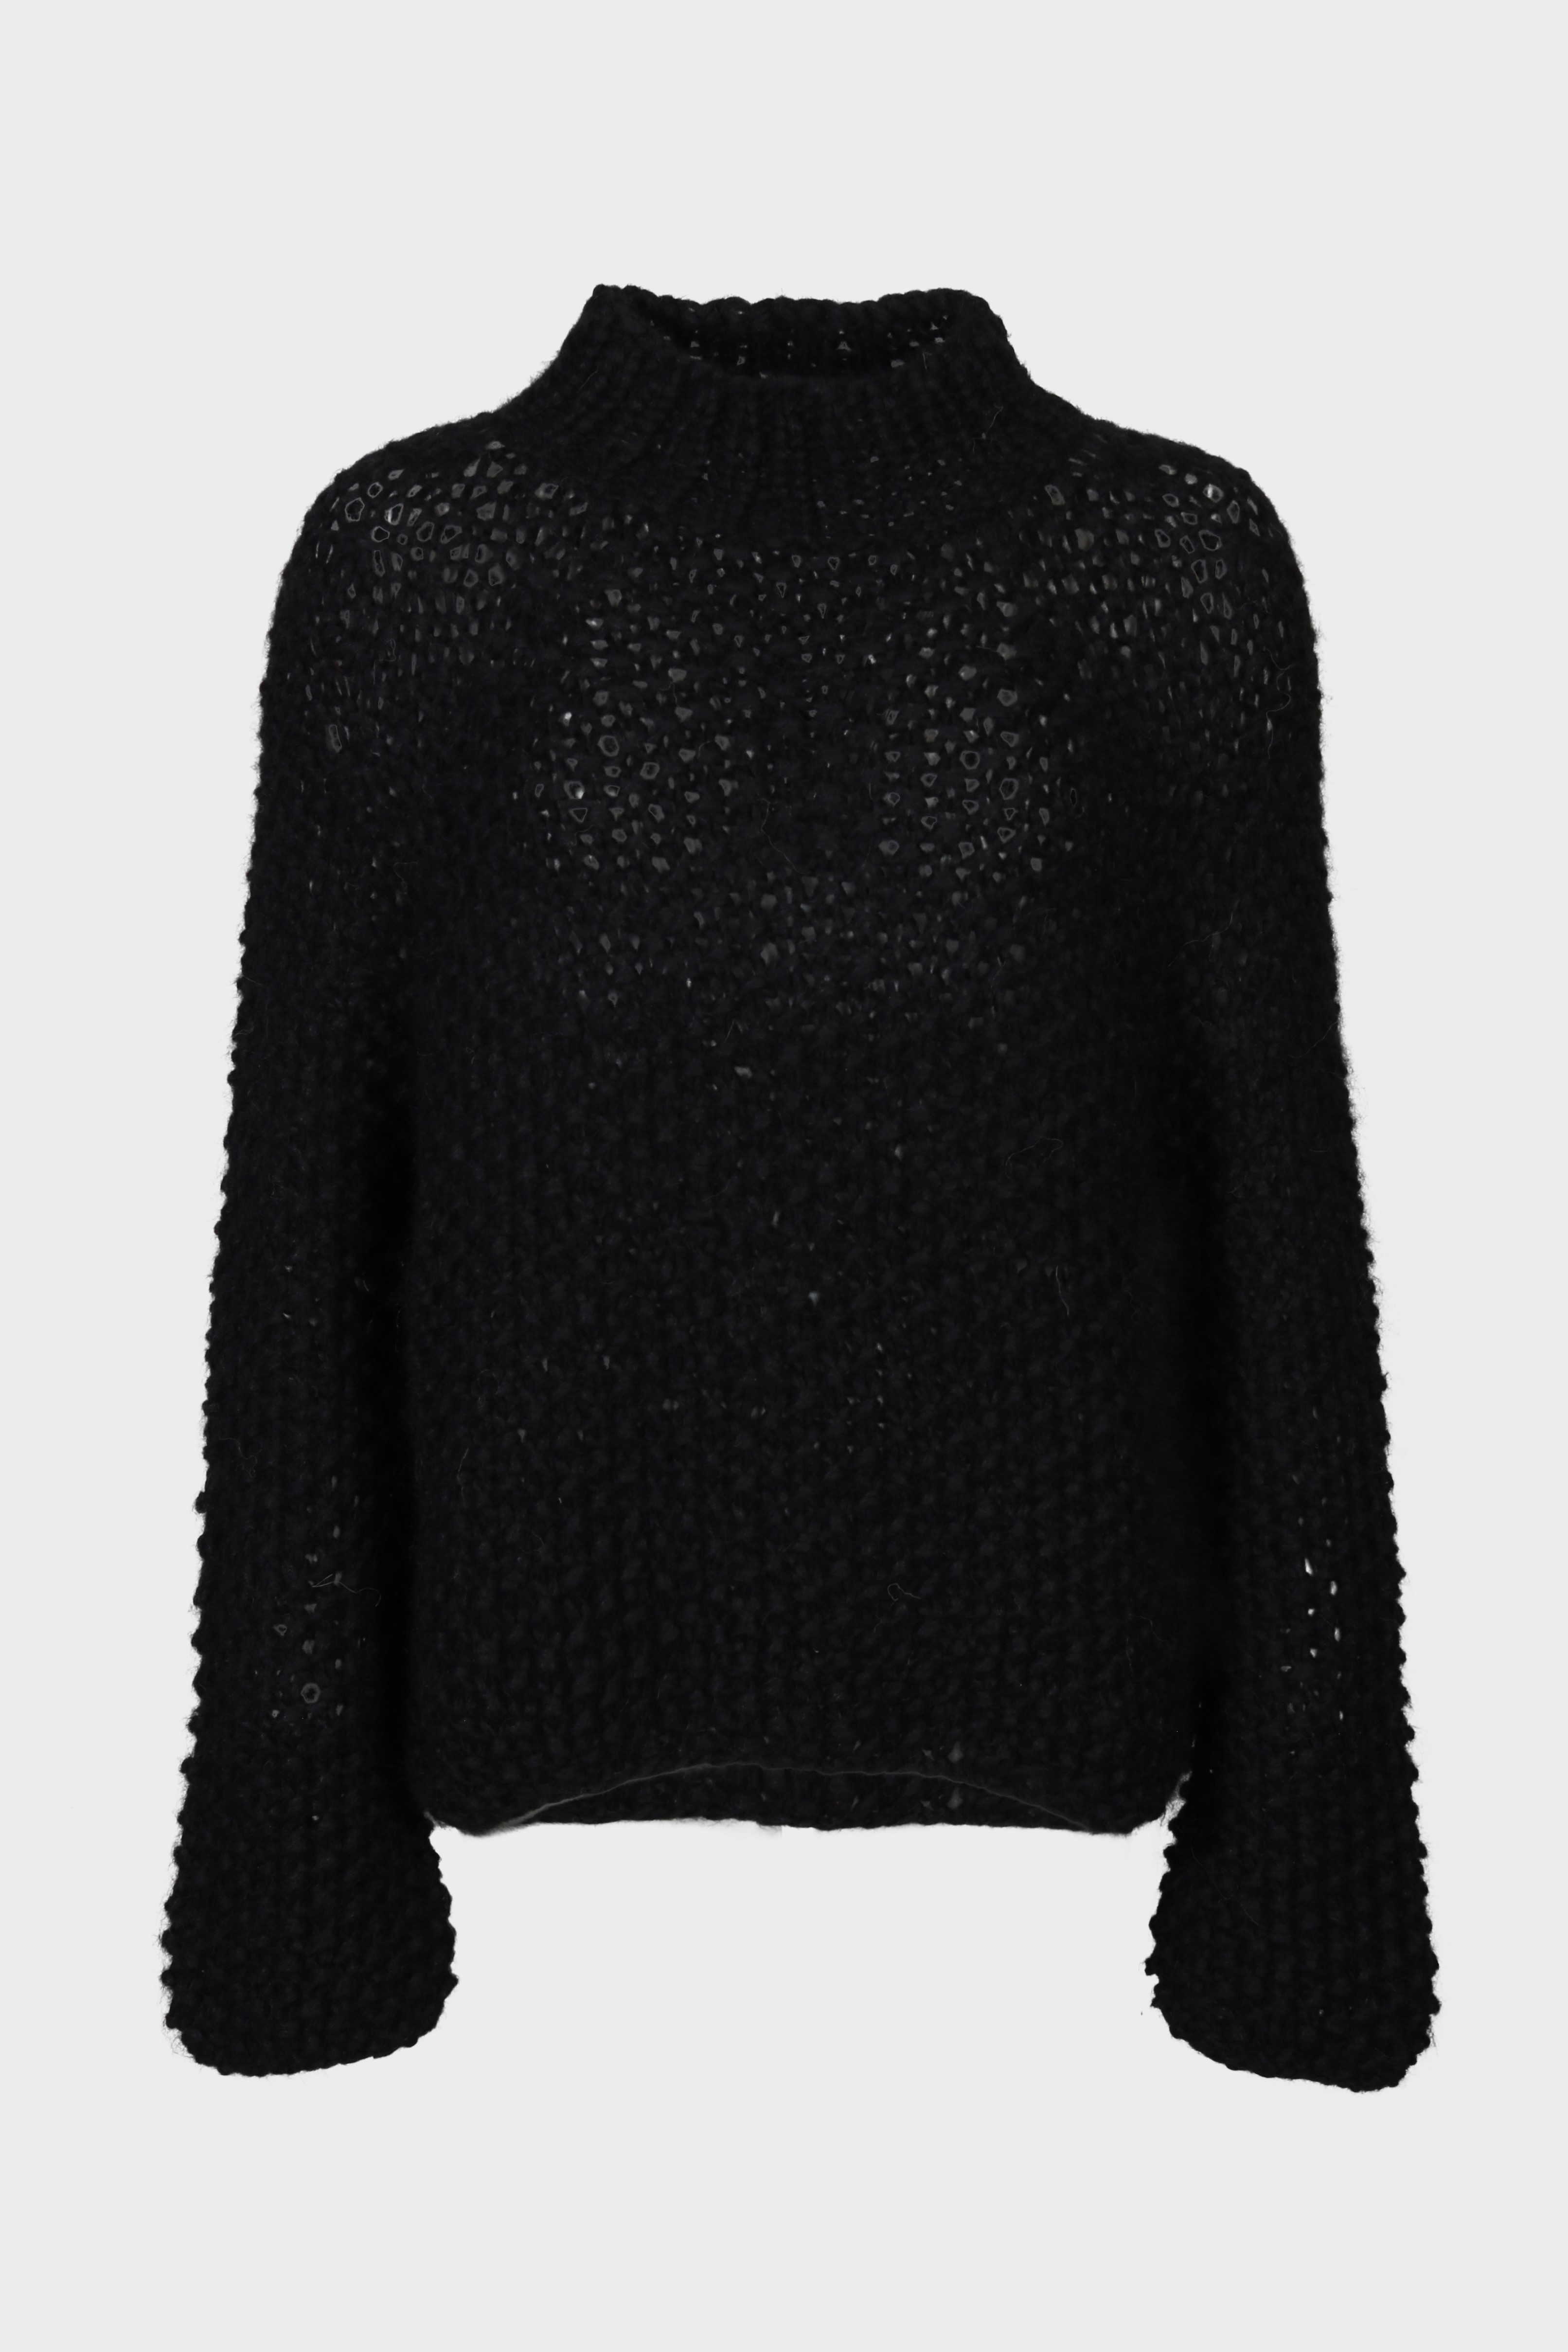 MAIAMI Pearl Pattern Knit Pullover in Black